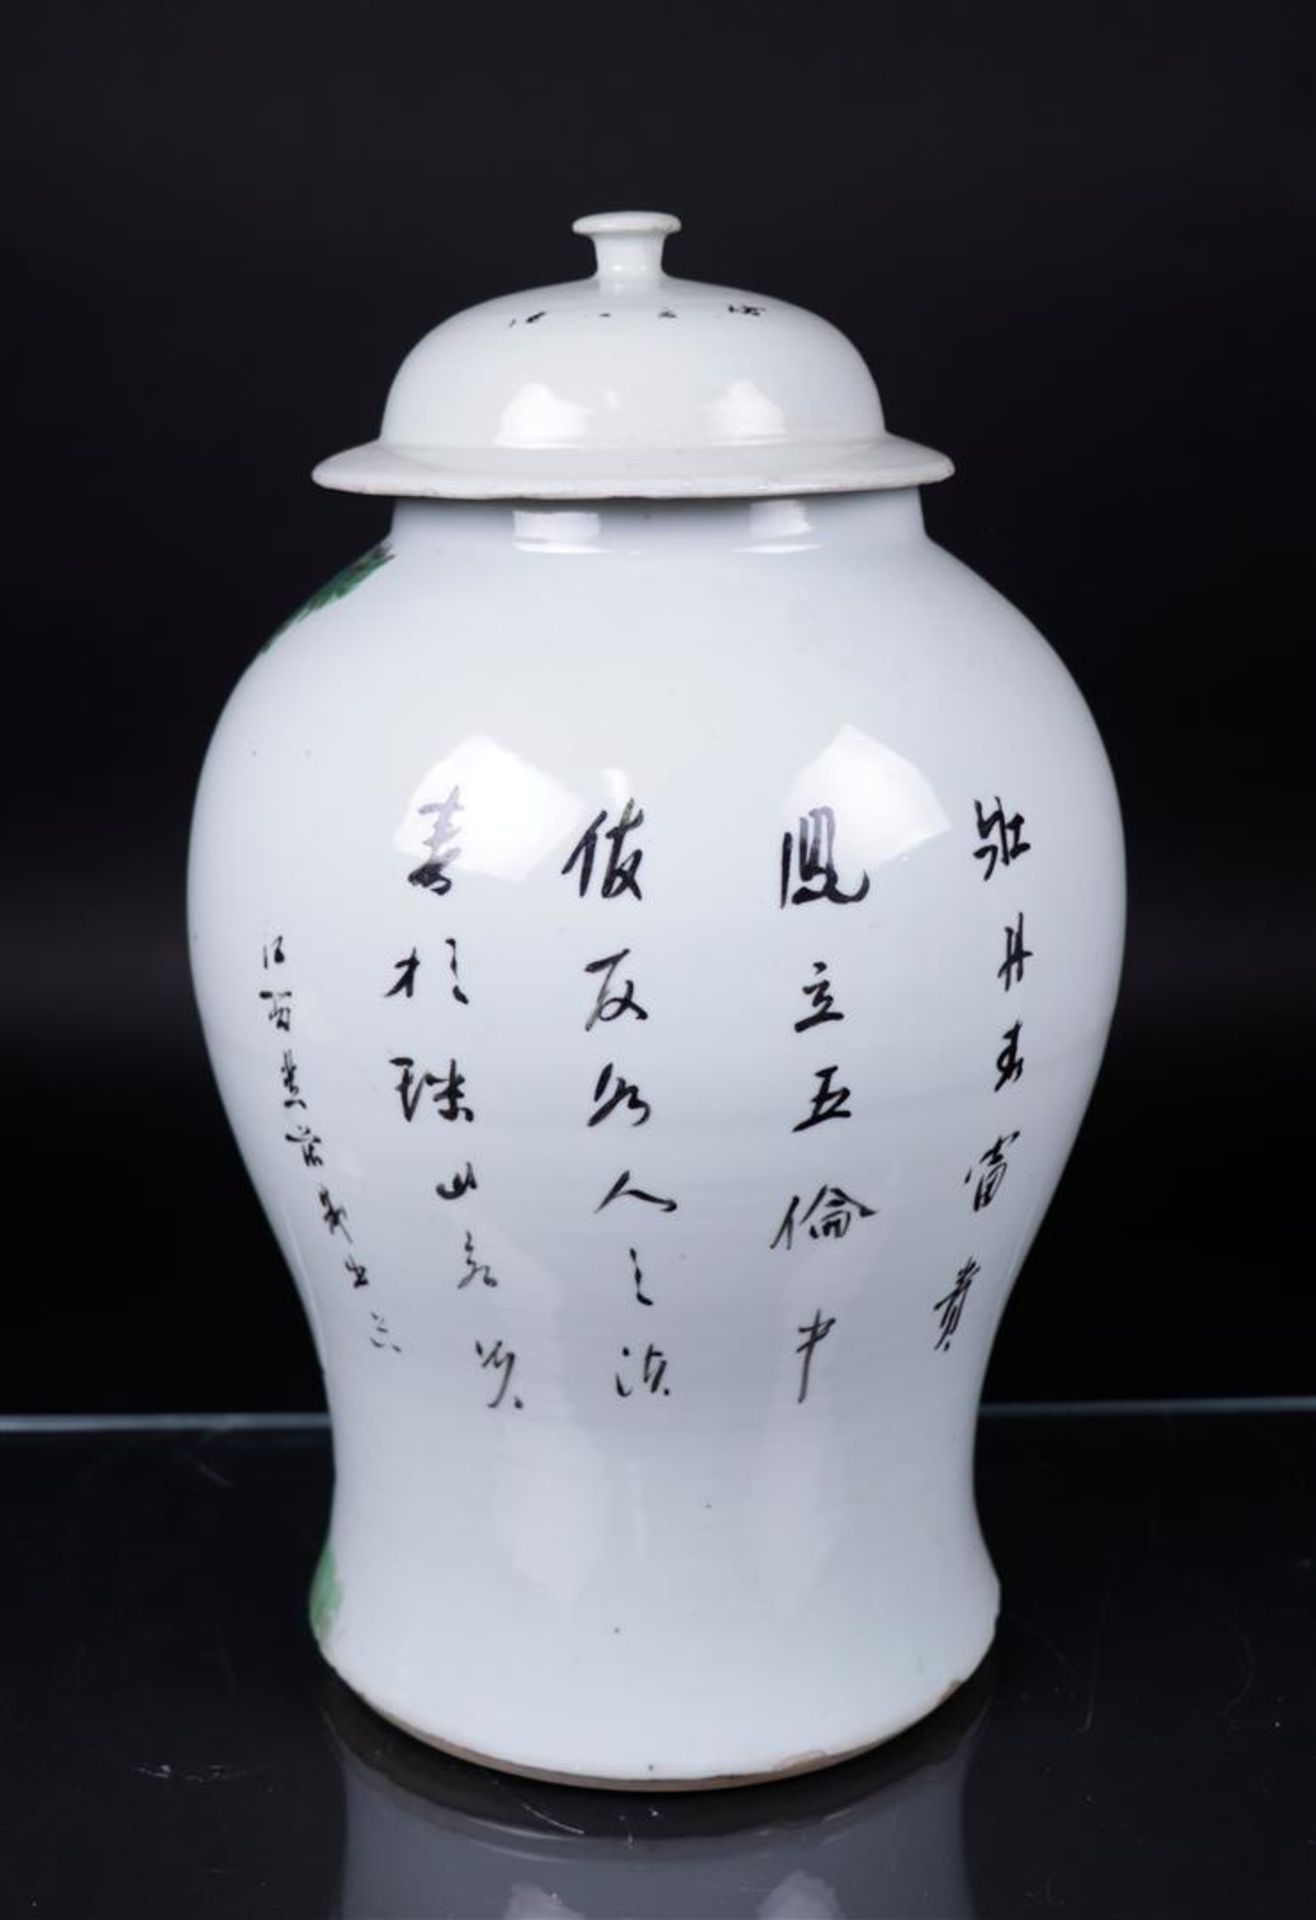 A porcelain Famille rose lidded vase decorated with various Chinese characters. China, 19th century. - Image 2 of 3